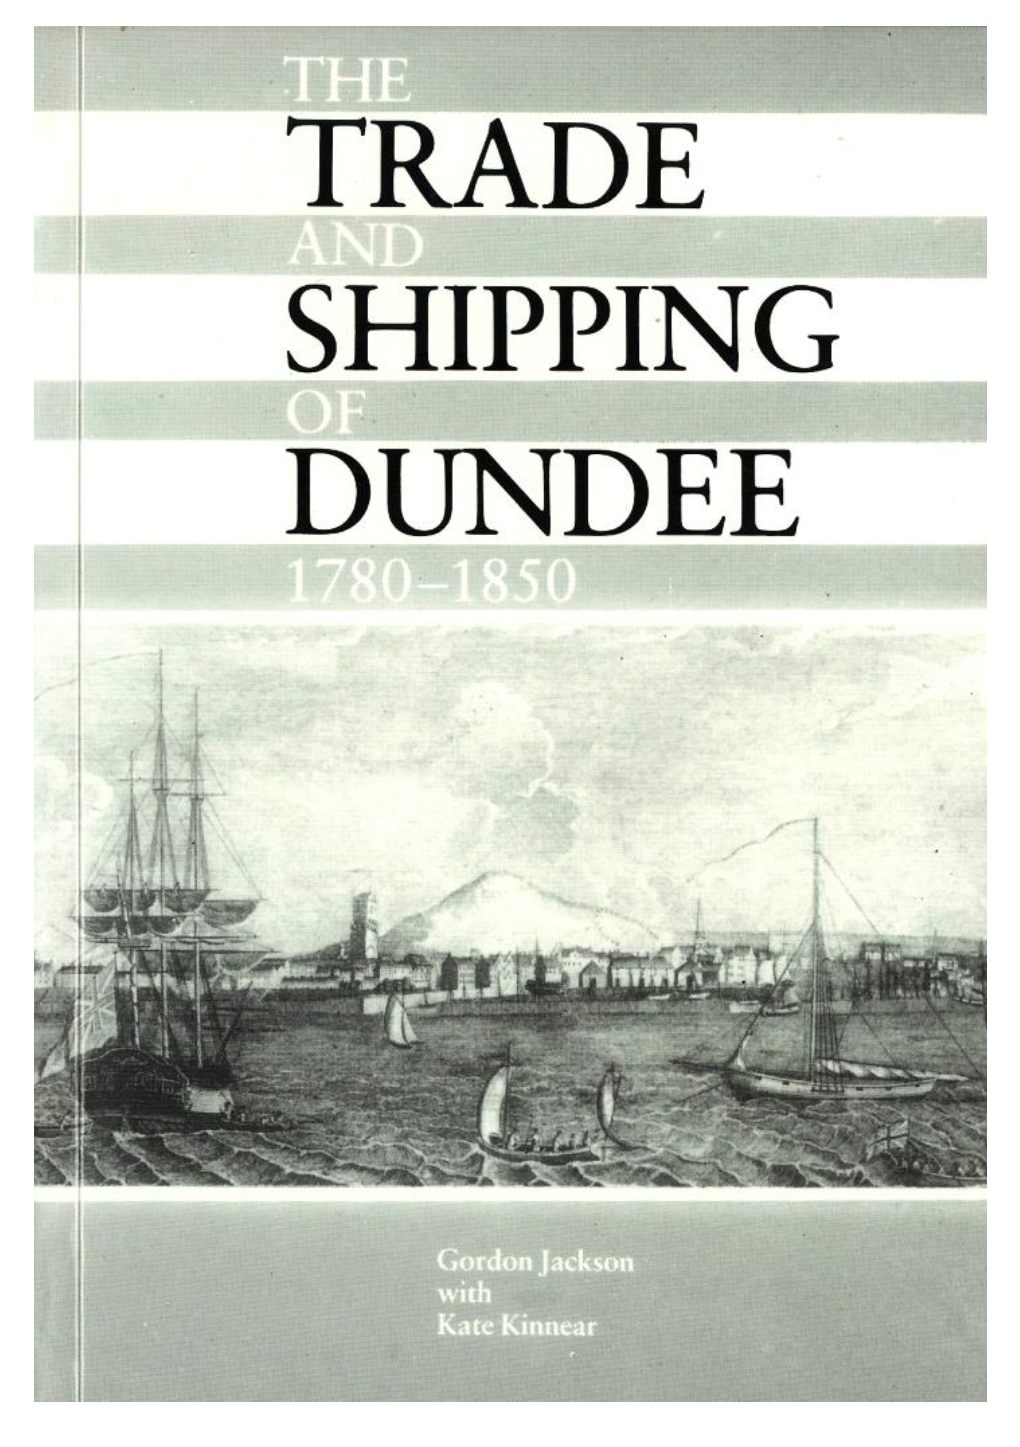 The Trade and Shipping of Dundee 1780-1850